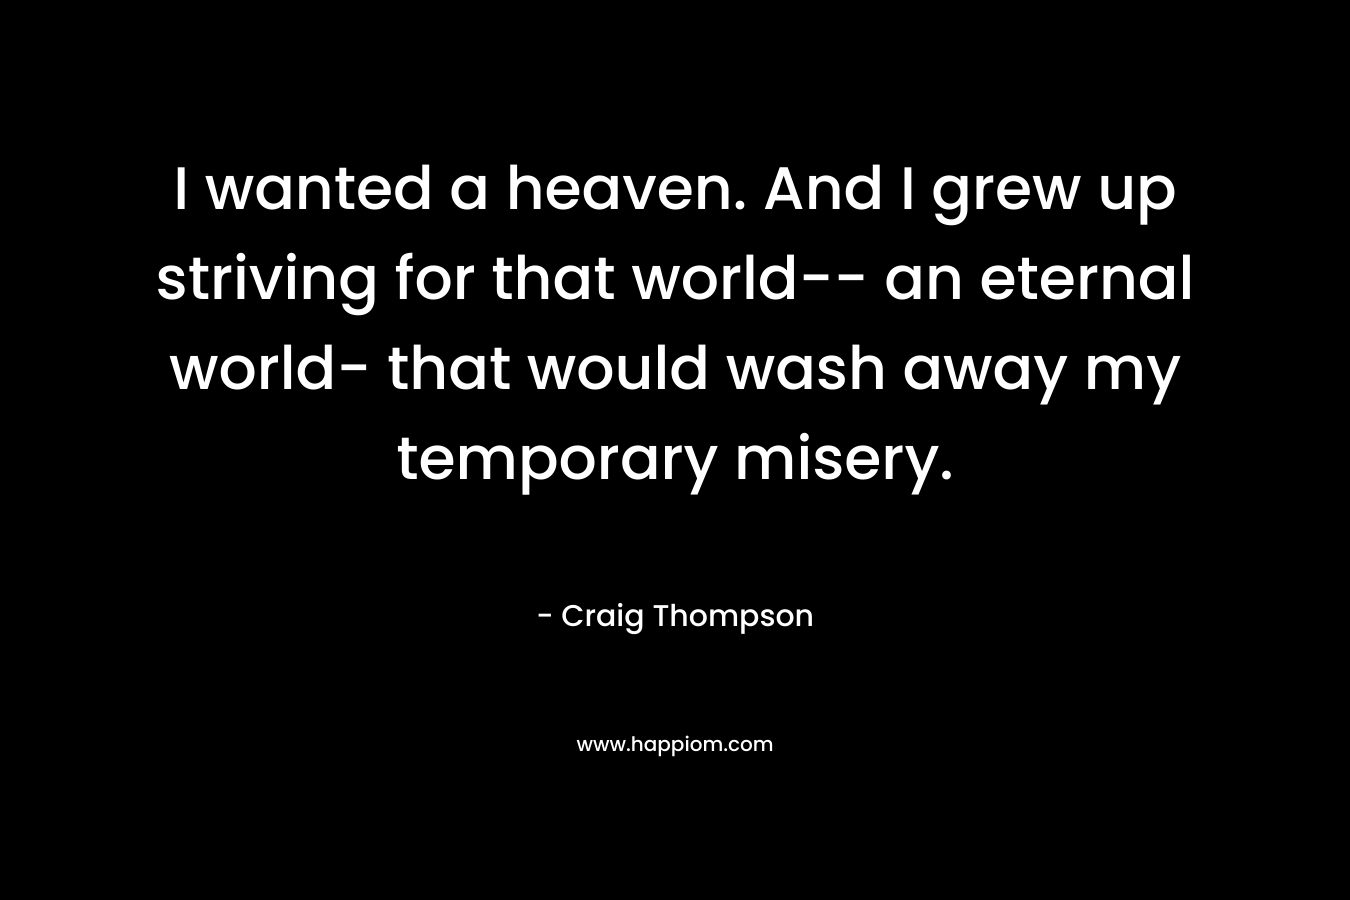 I wanted a heaven. And I grew up striving for that world-- an eternal world- that would wash away my temporary misery.